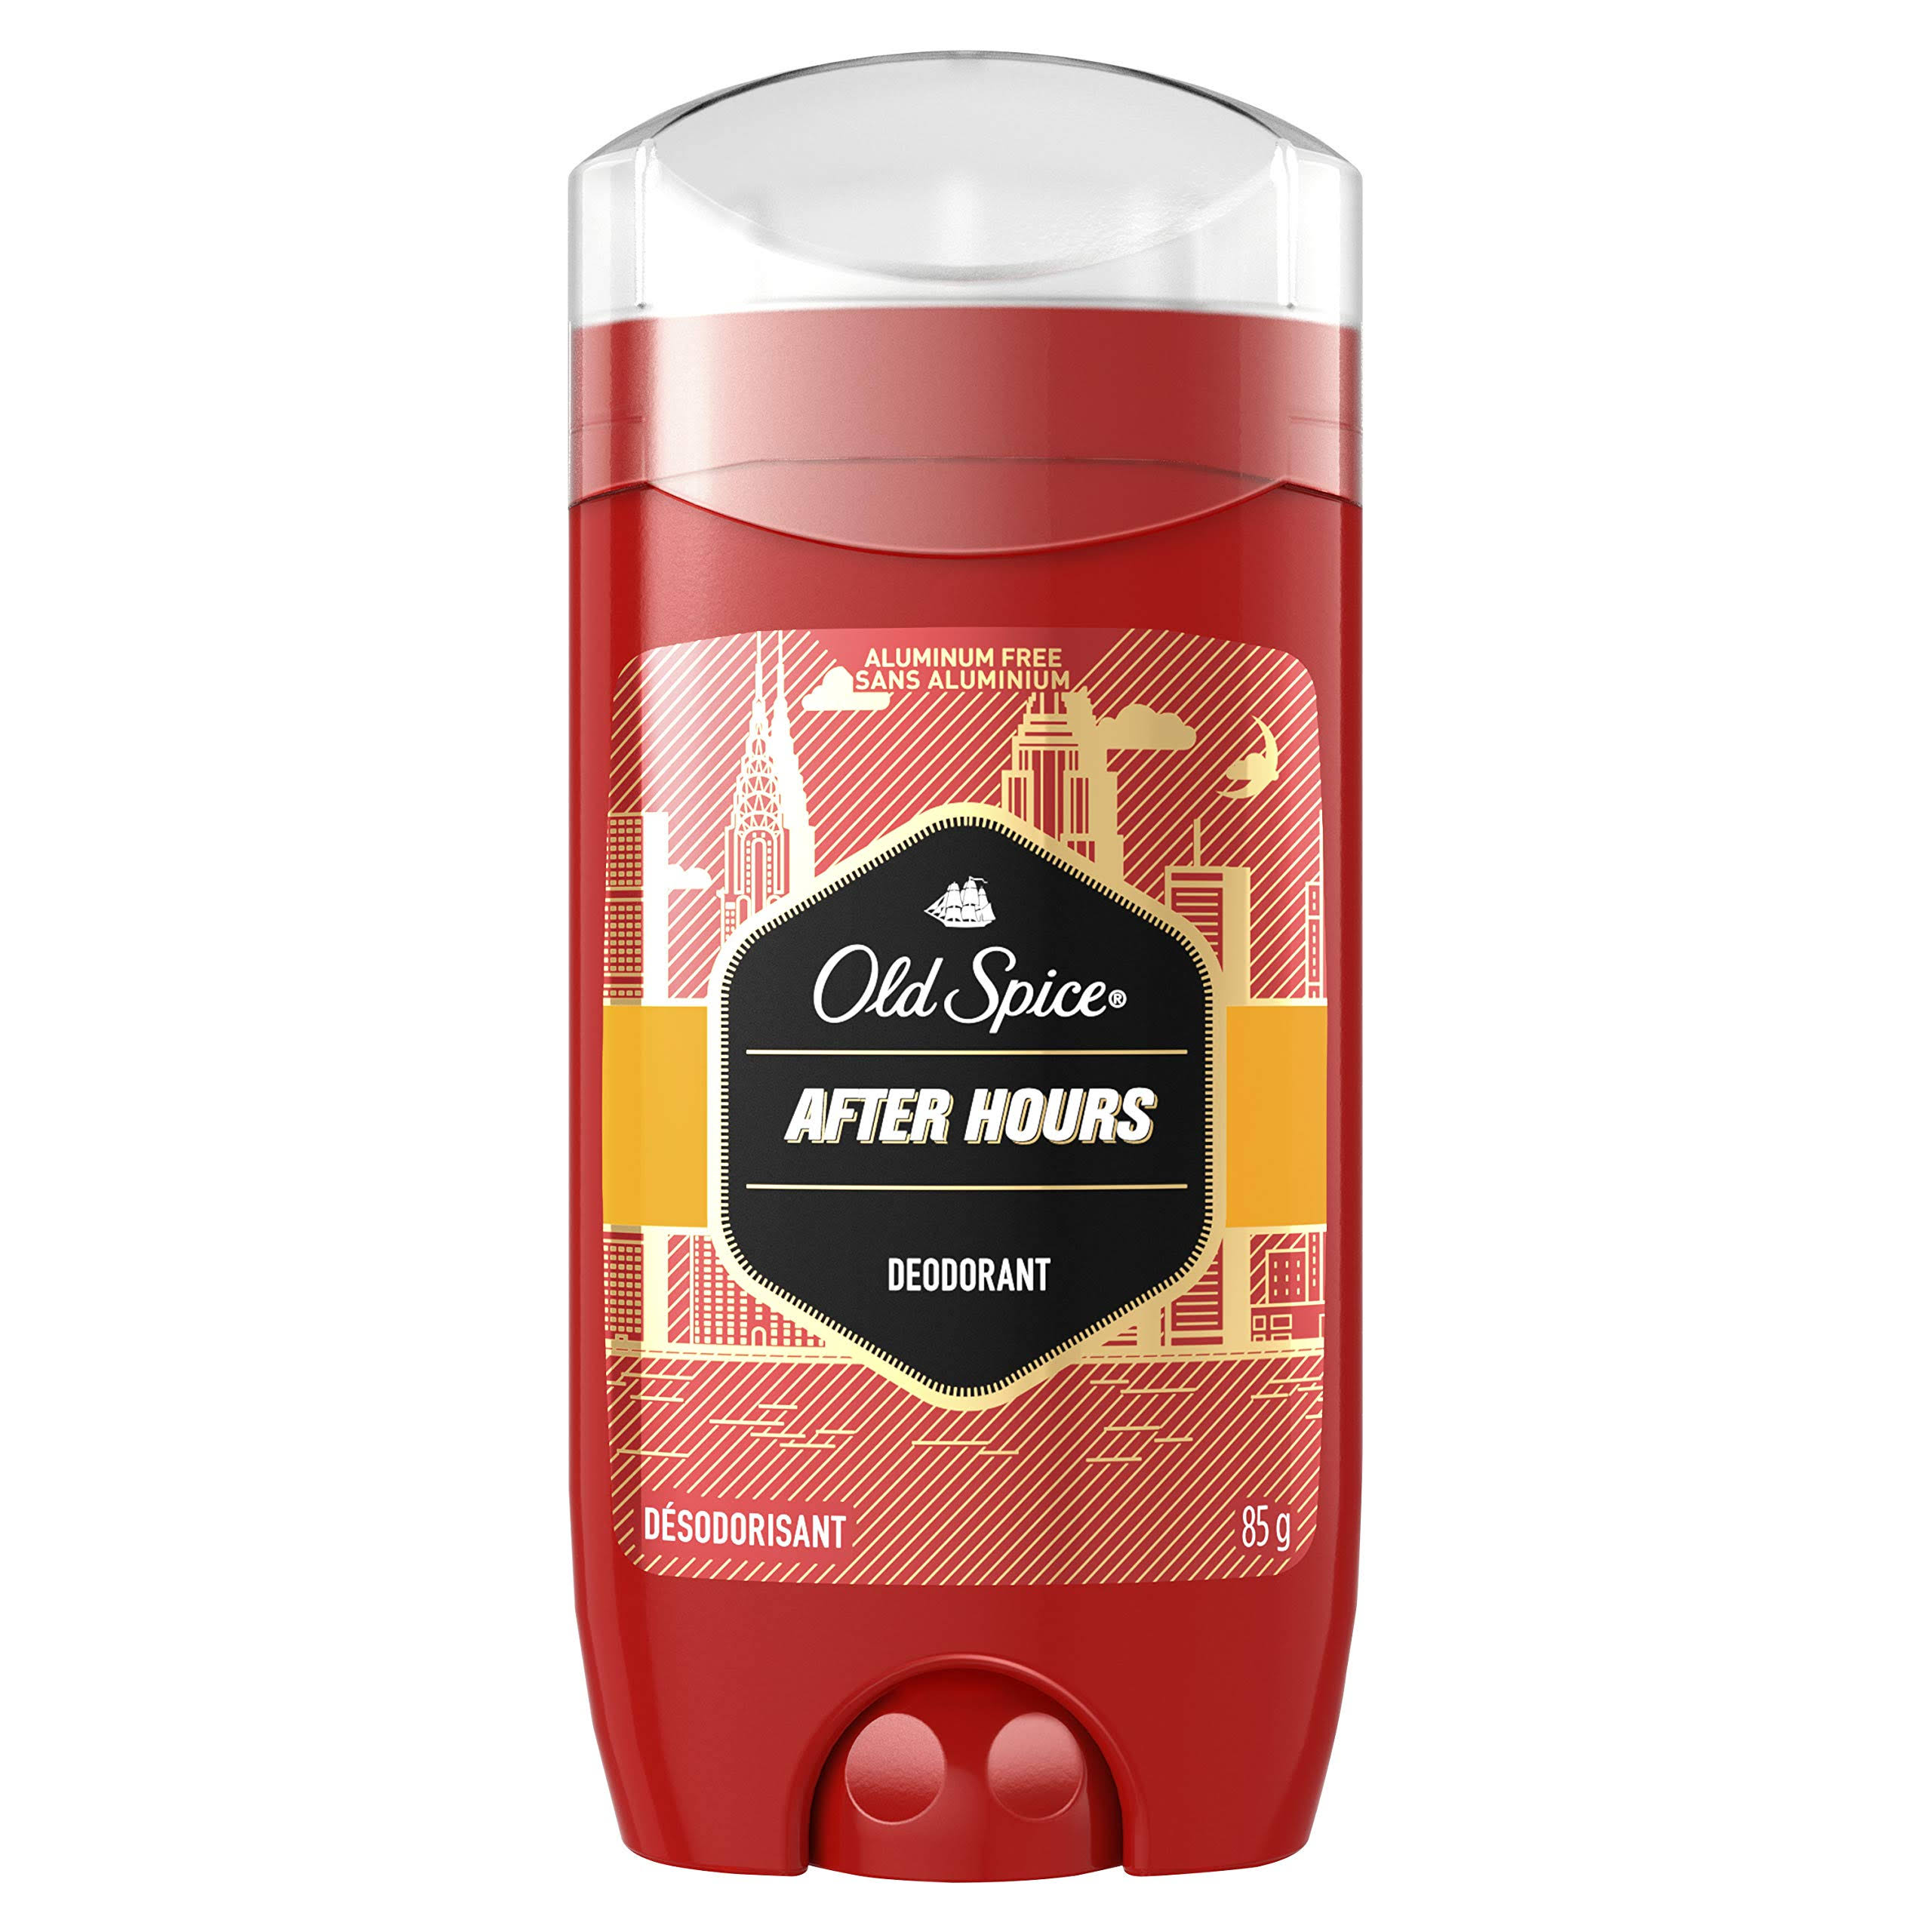 Old Spice Red Zone Deodorant - After Hours, 85g